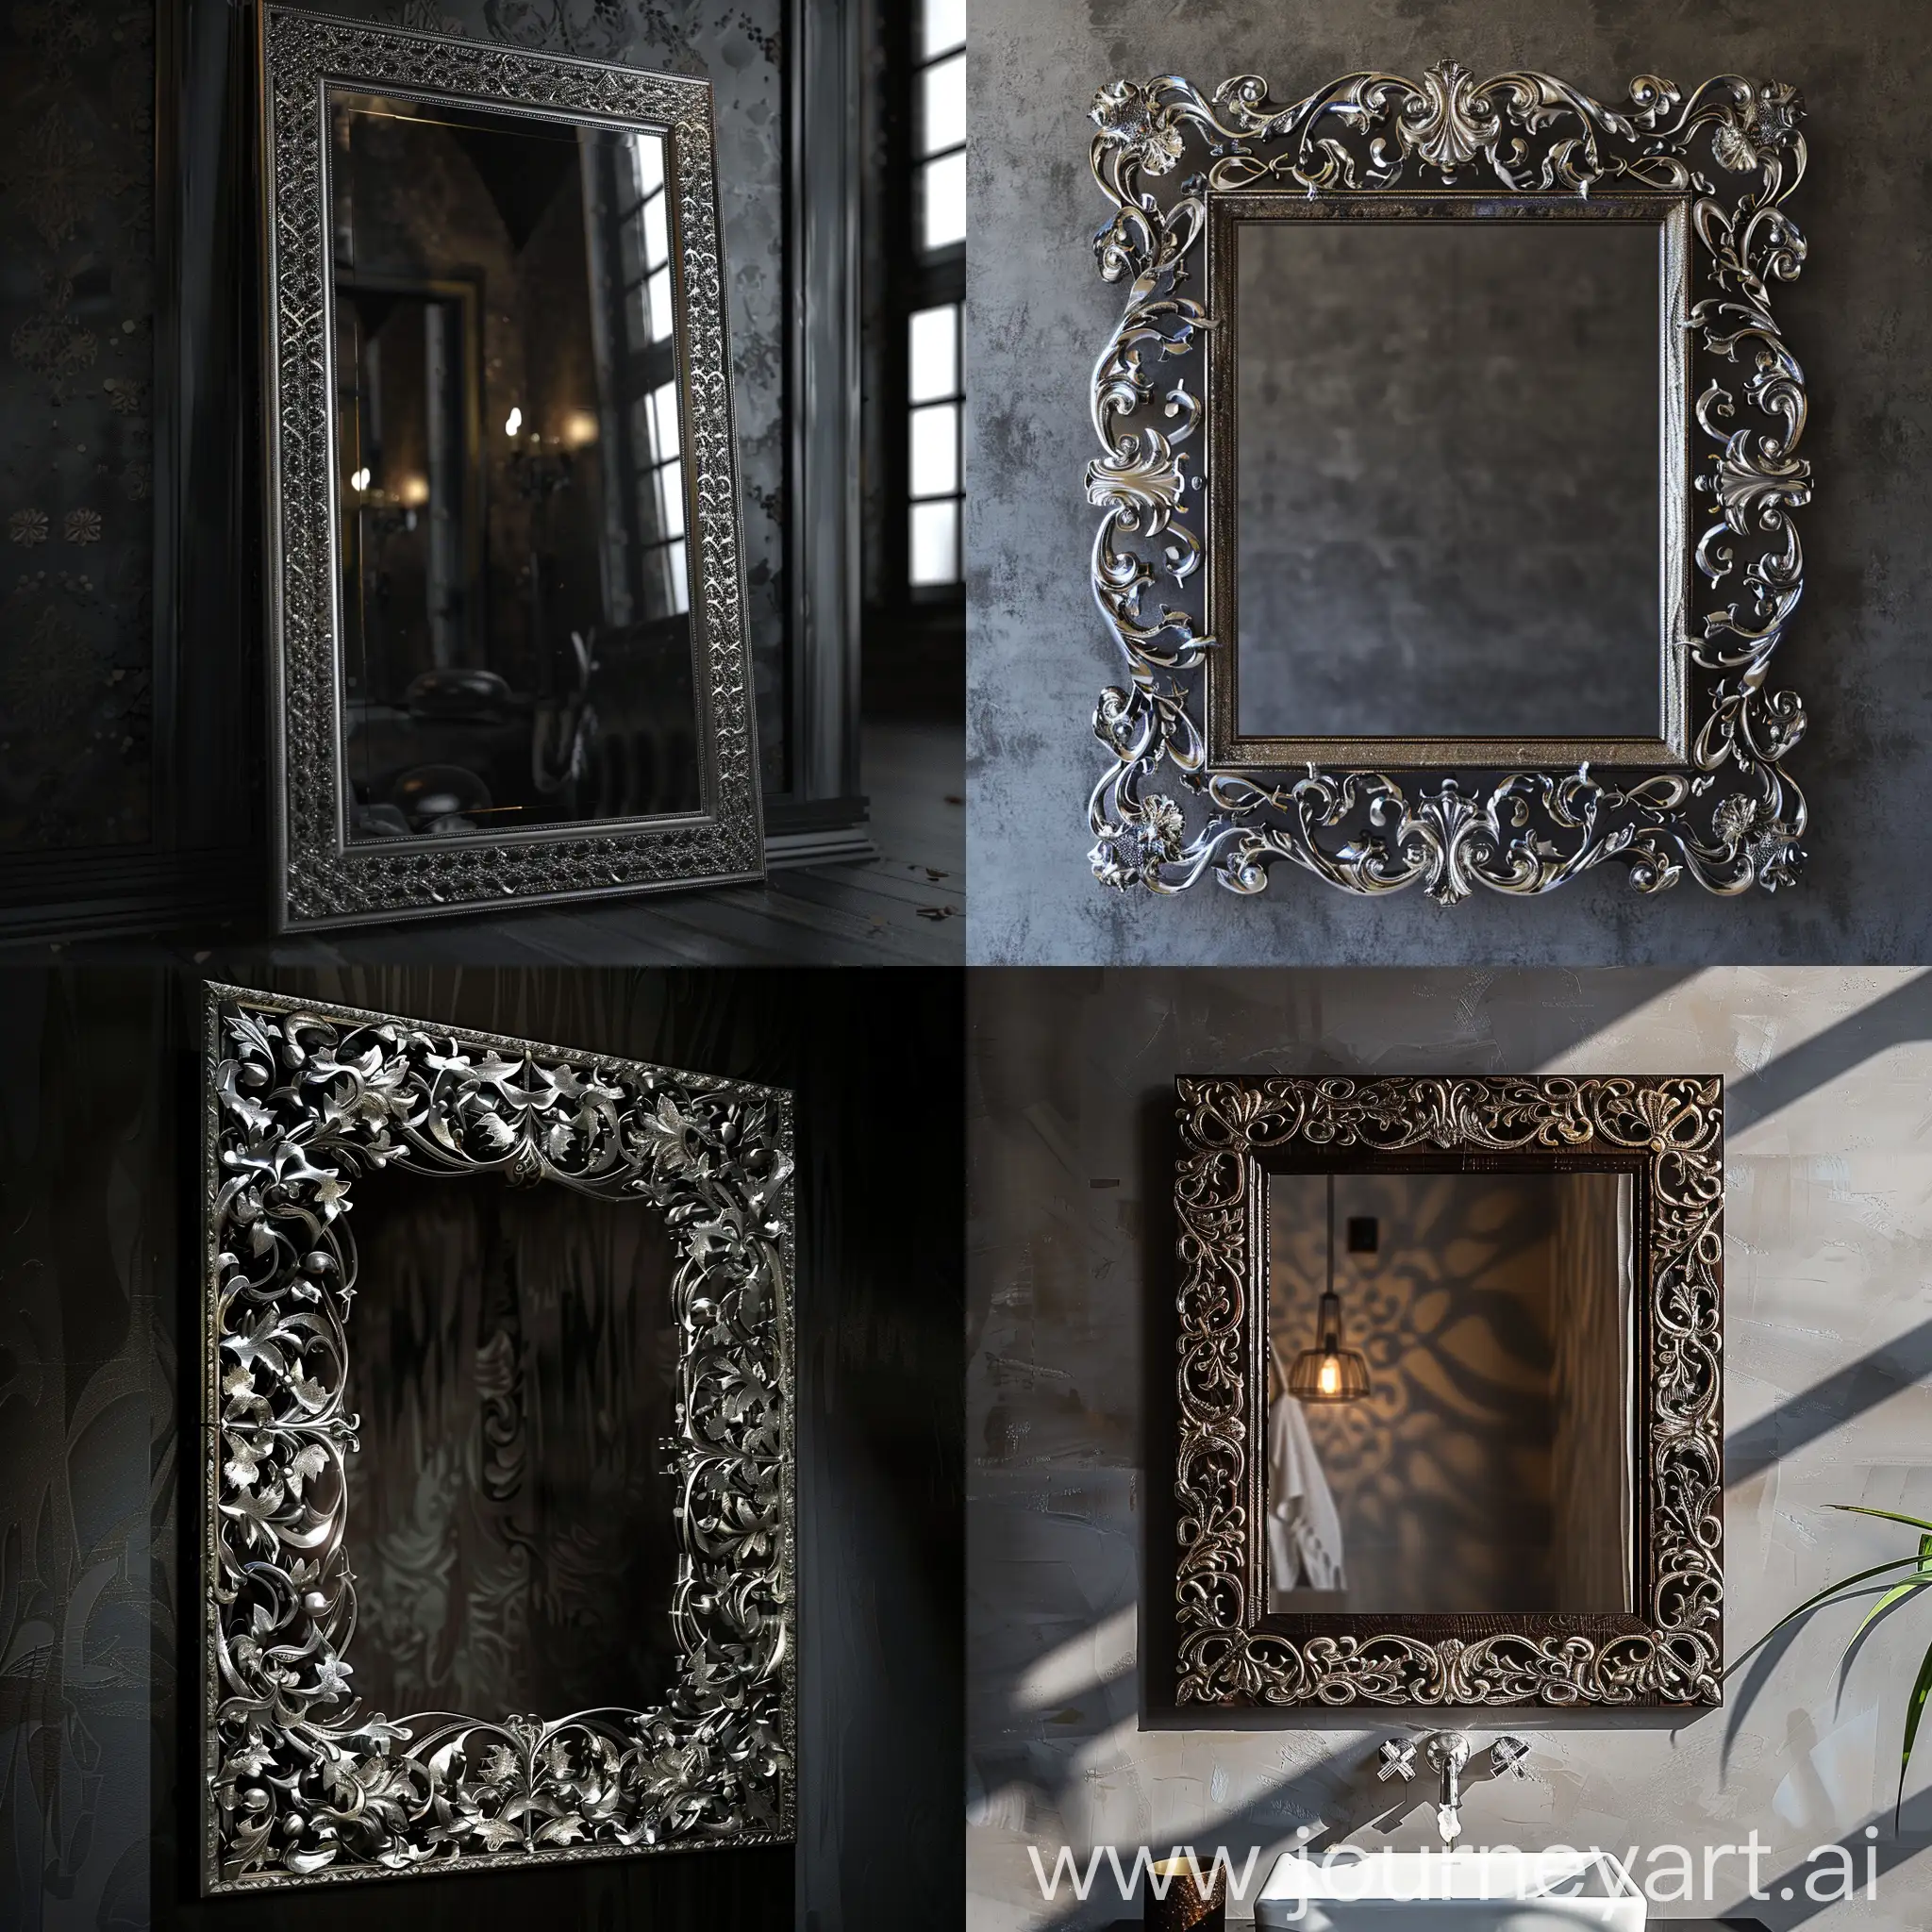 The mirror has an elegant and exquisite frame made of dark wood with silver patterns. These patterns may glow slightly, drawing attention to the mirror. "Pixel Game" "Old game" "2d game" "Pixel art"